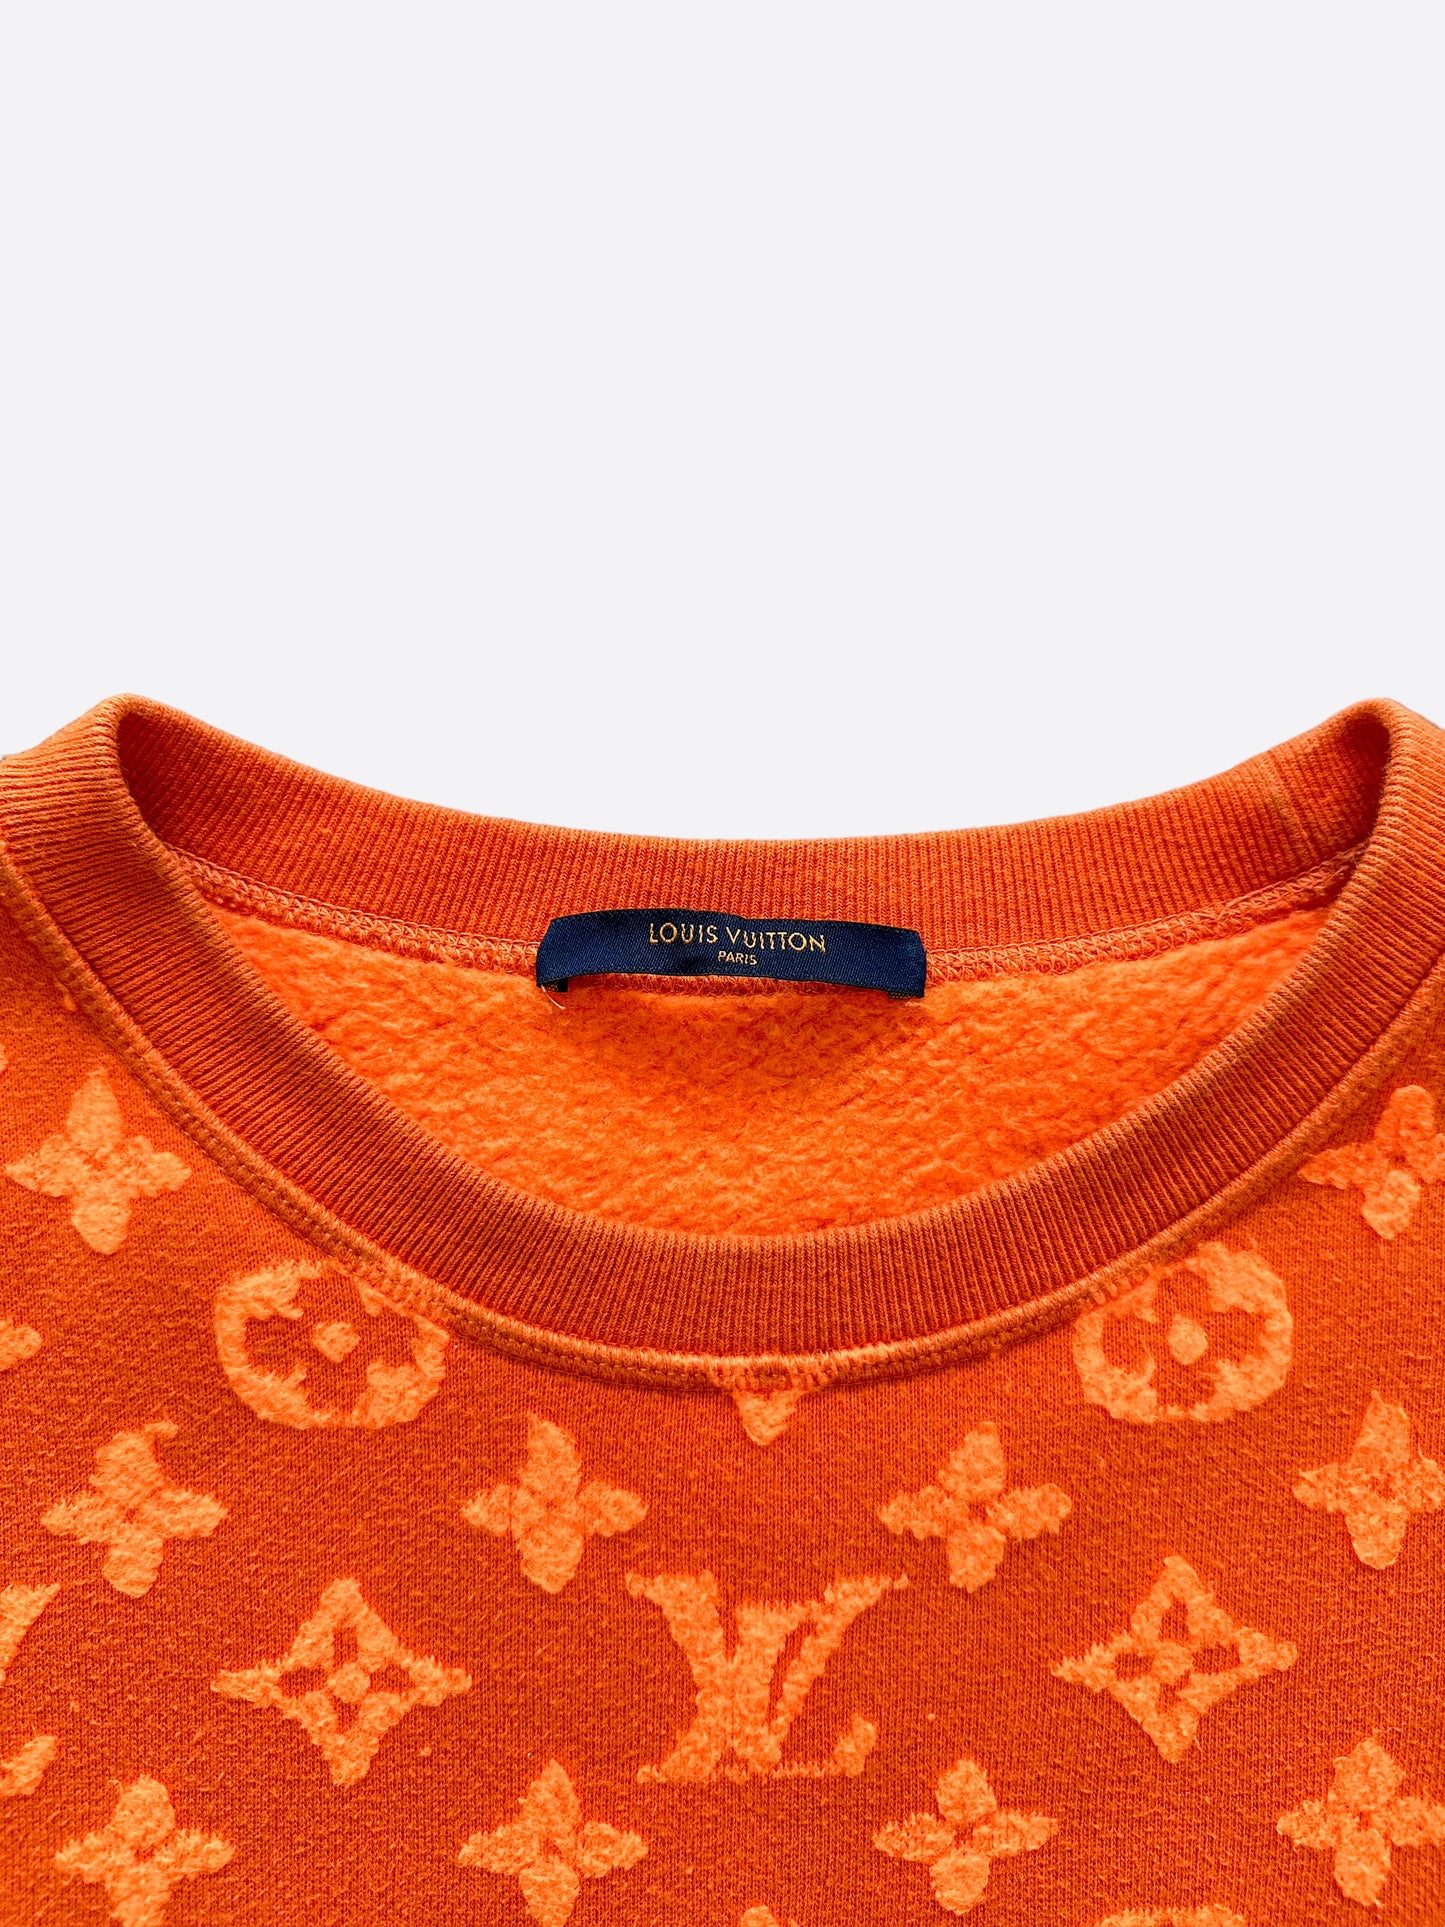 Louis Vuitton 2019 Printed Pullover - Orange Sweaters, Clothing